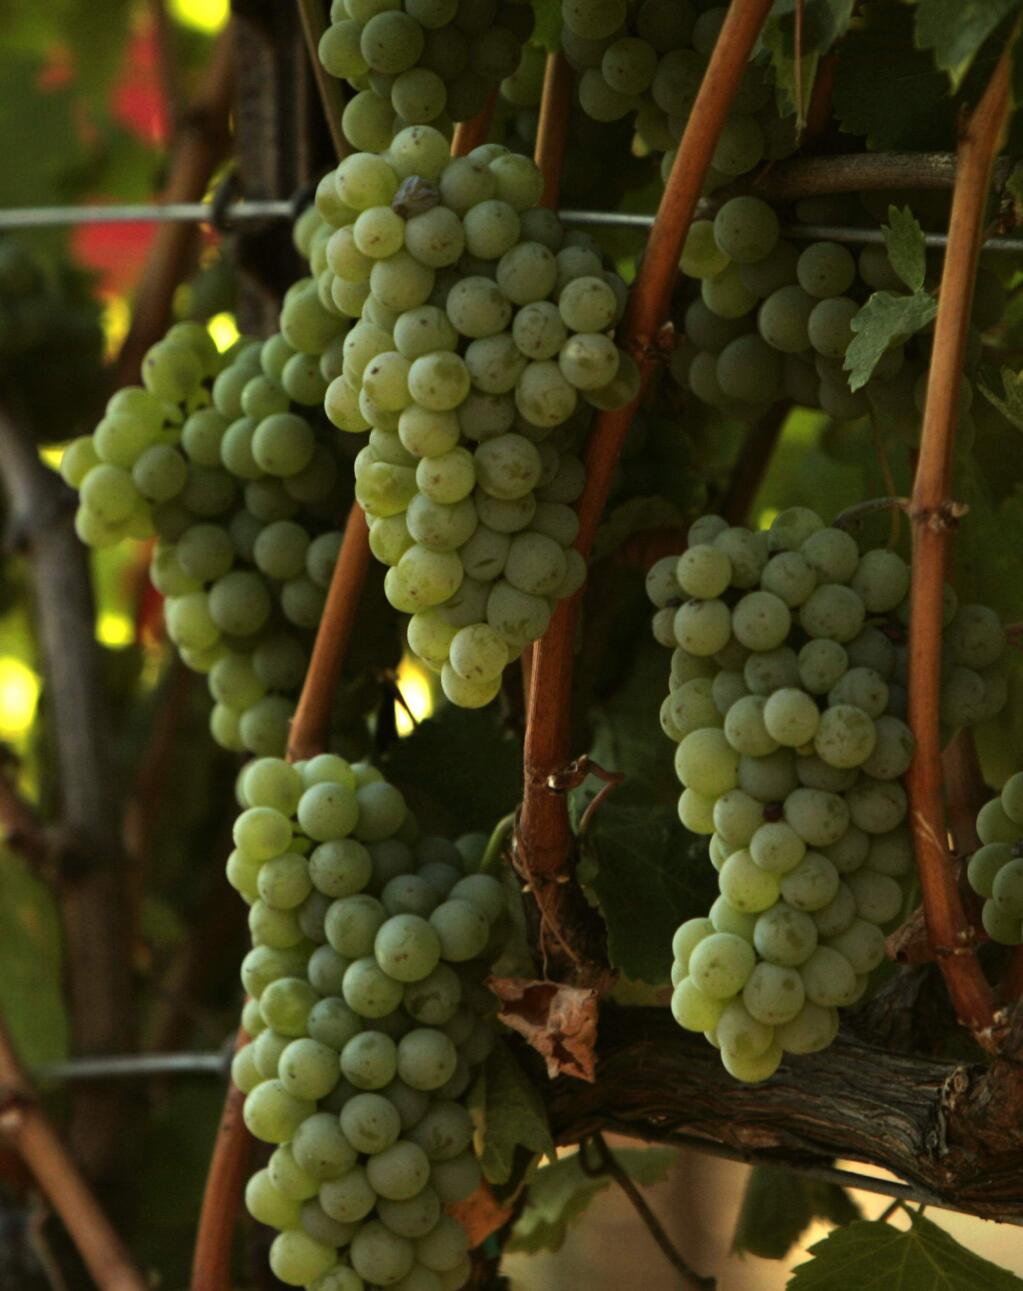 Grapevines use less water than most fruit trees and landscape plants and require about f gallons a week. They don’t need watering in winter. The best way to irrigate them is through a drip system. (Chad Surmick/The Press Democrat)